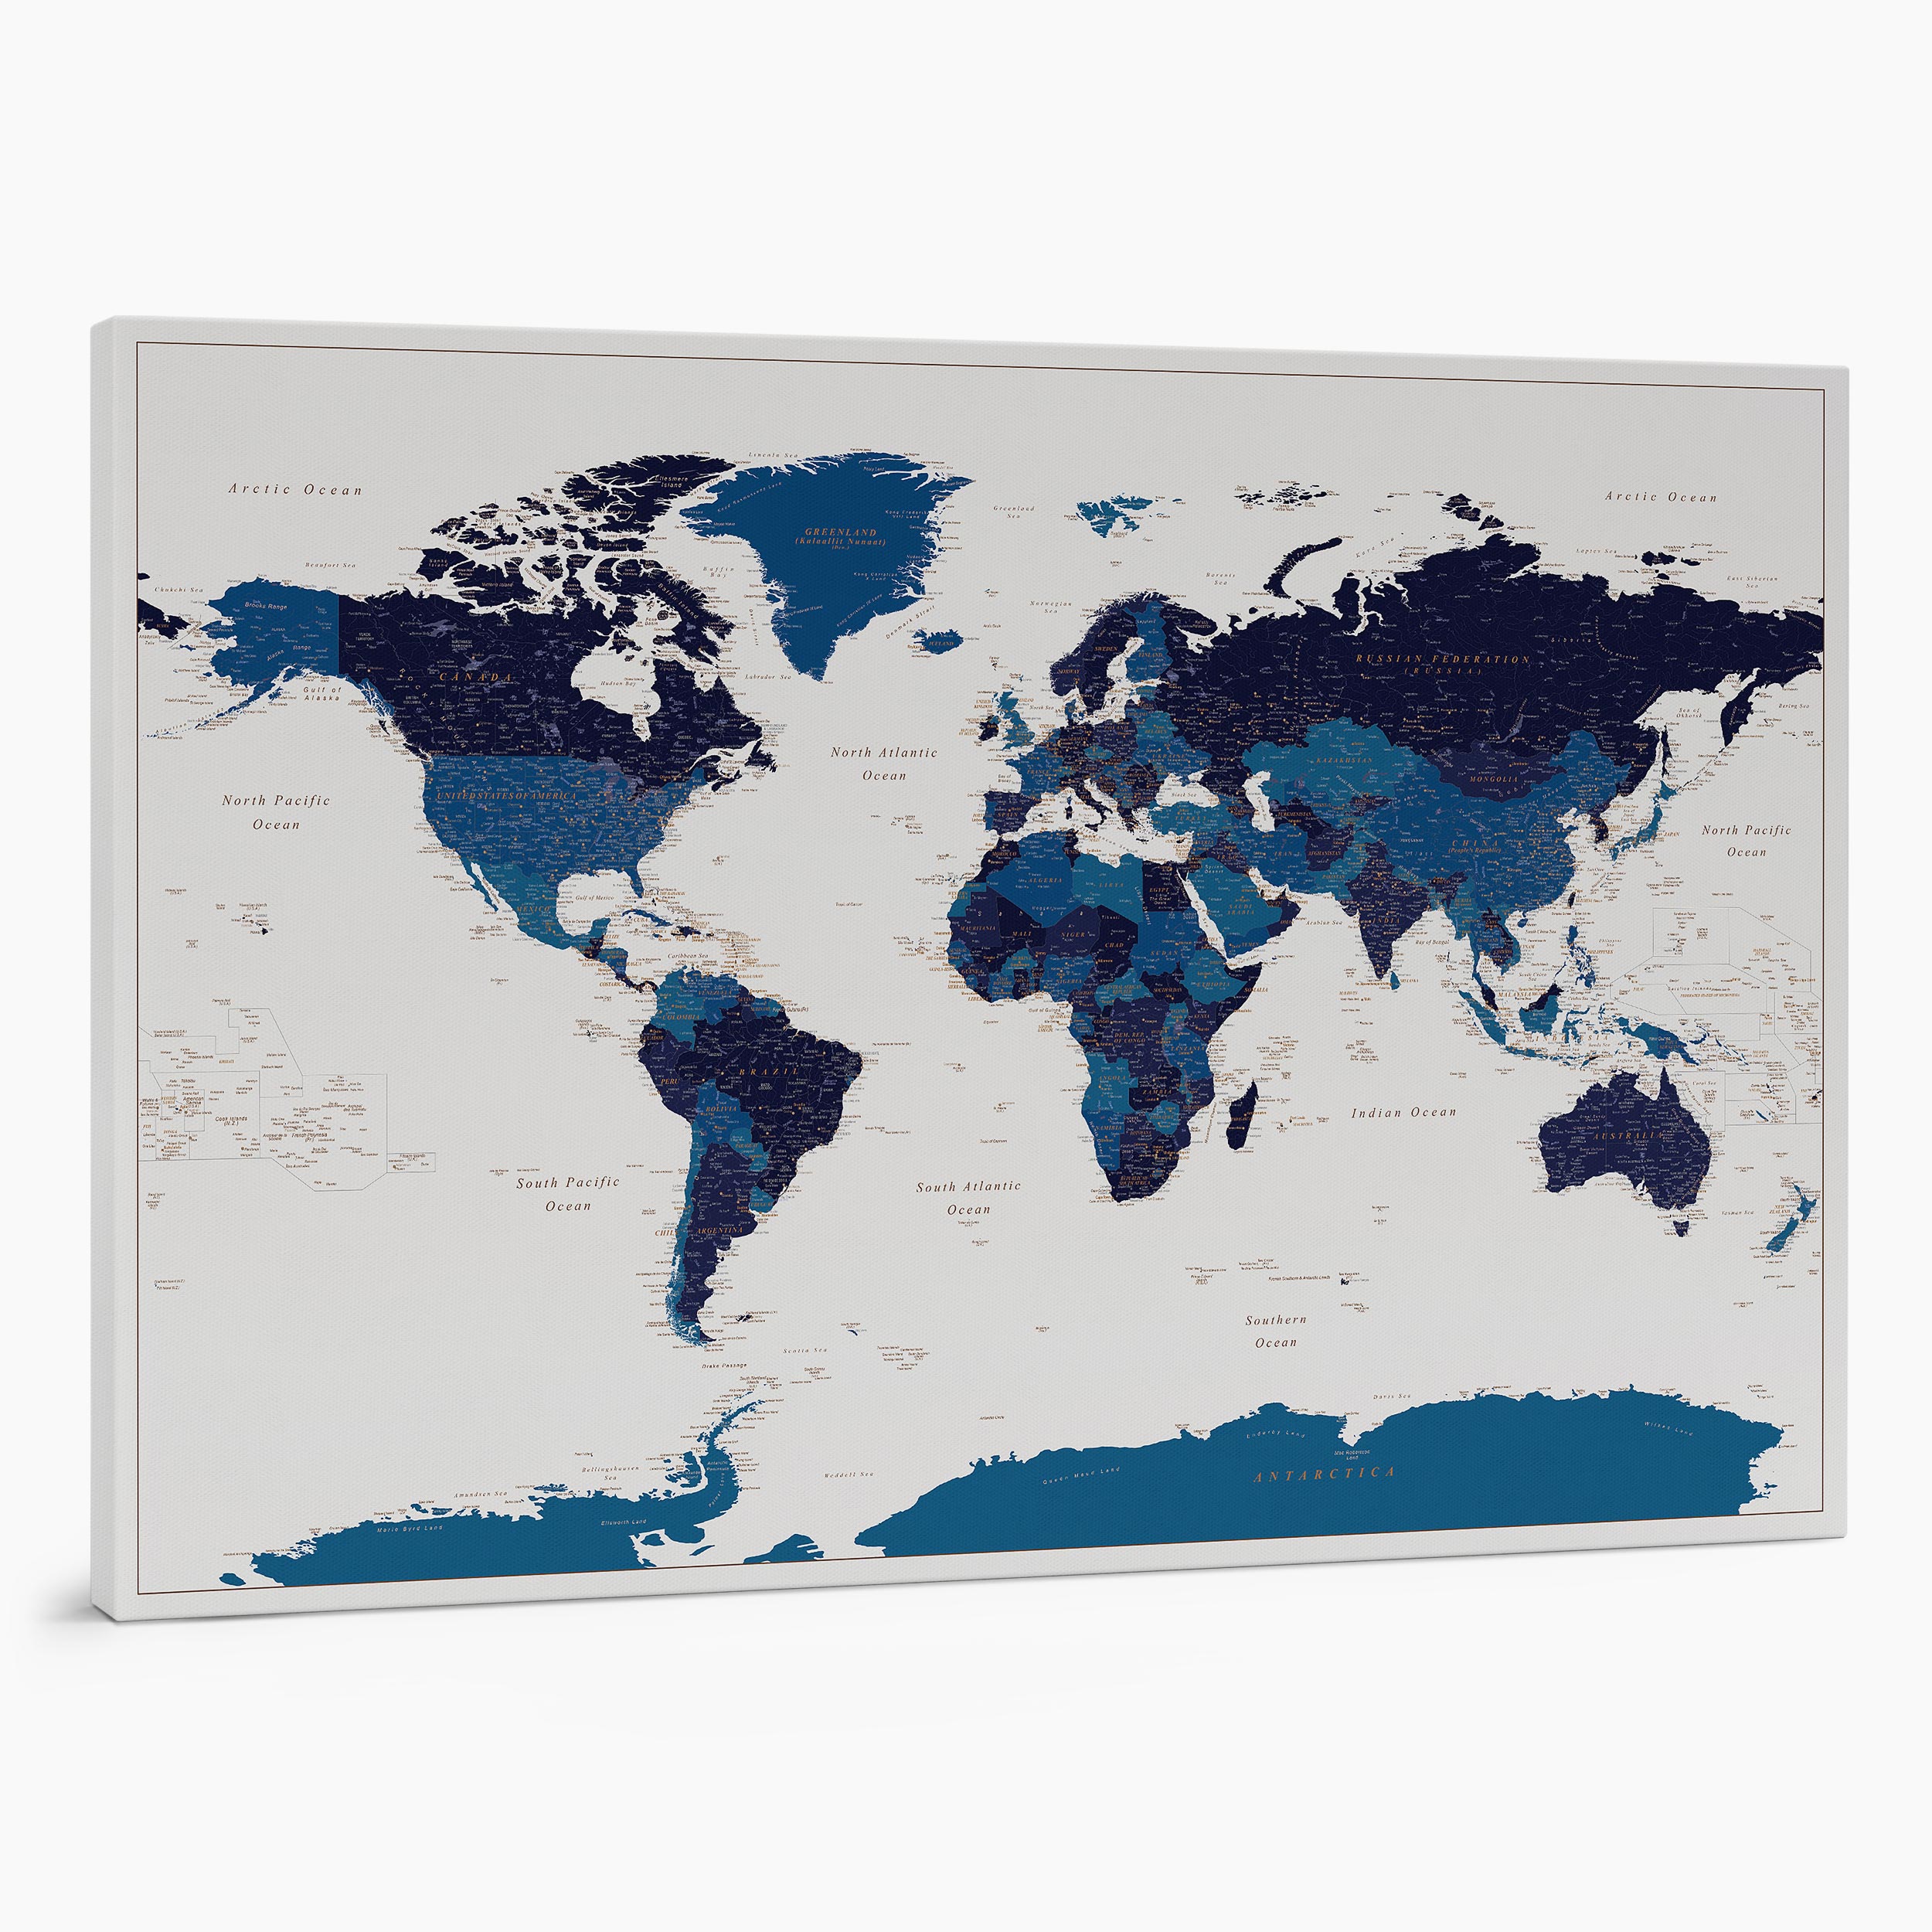 2P large push pin world map to track places visited on canvas modern blue